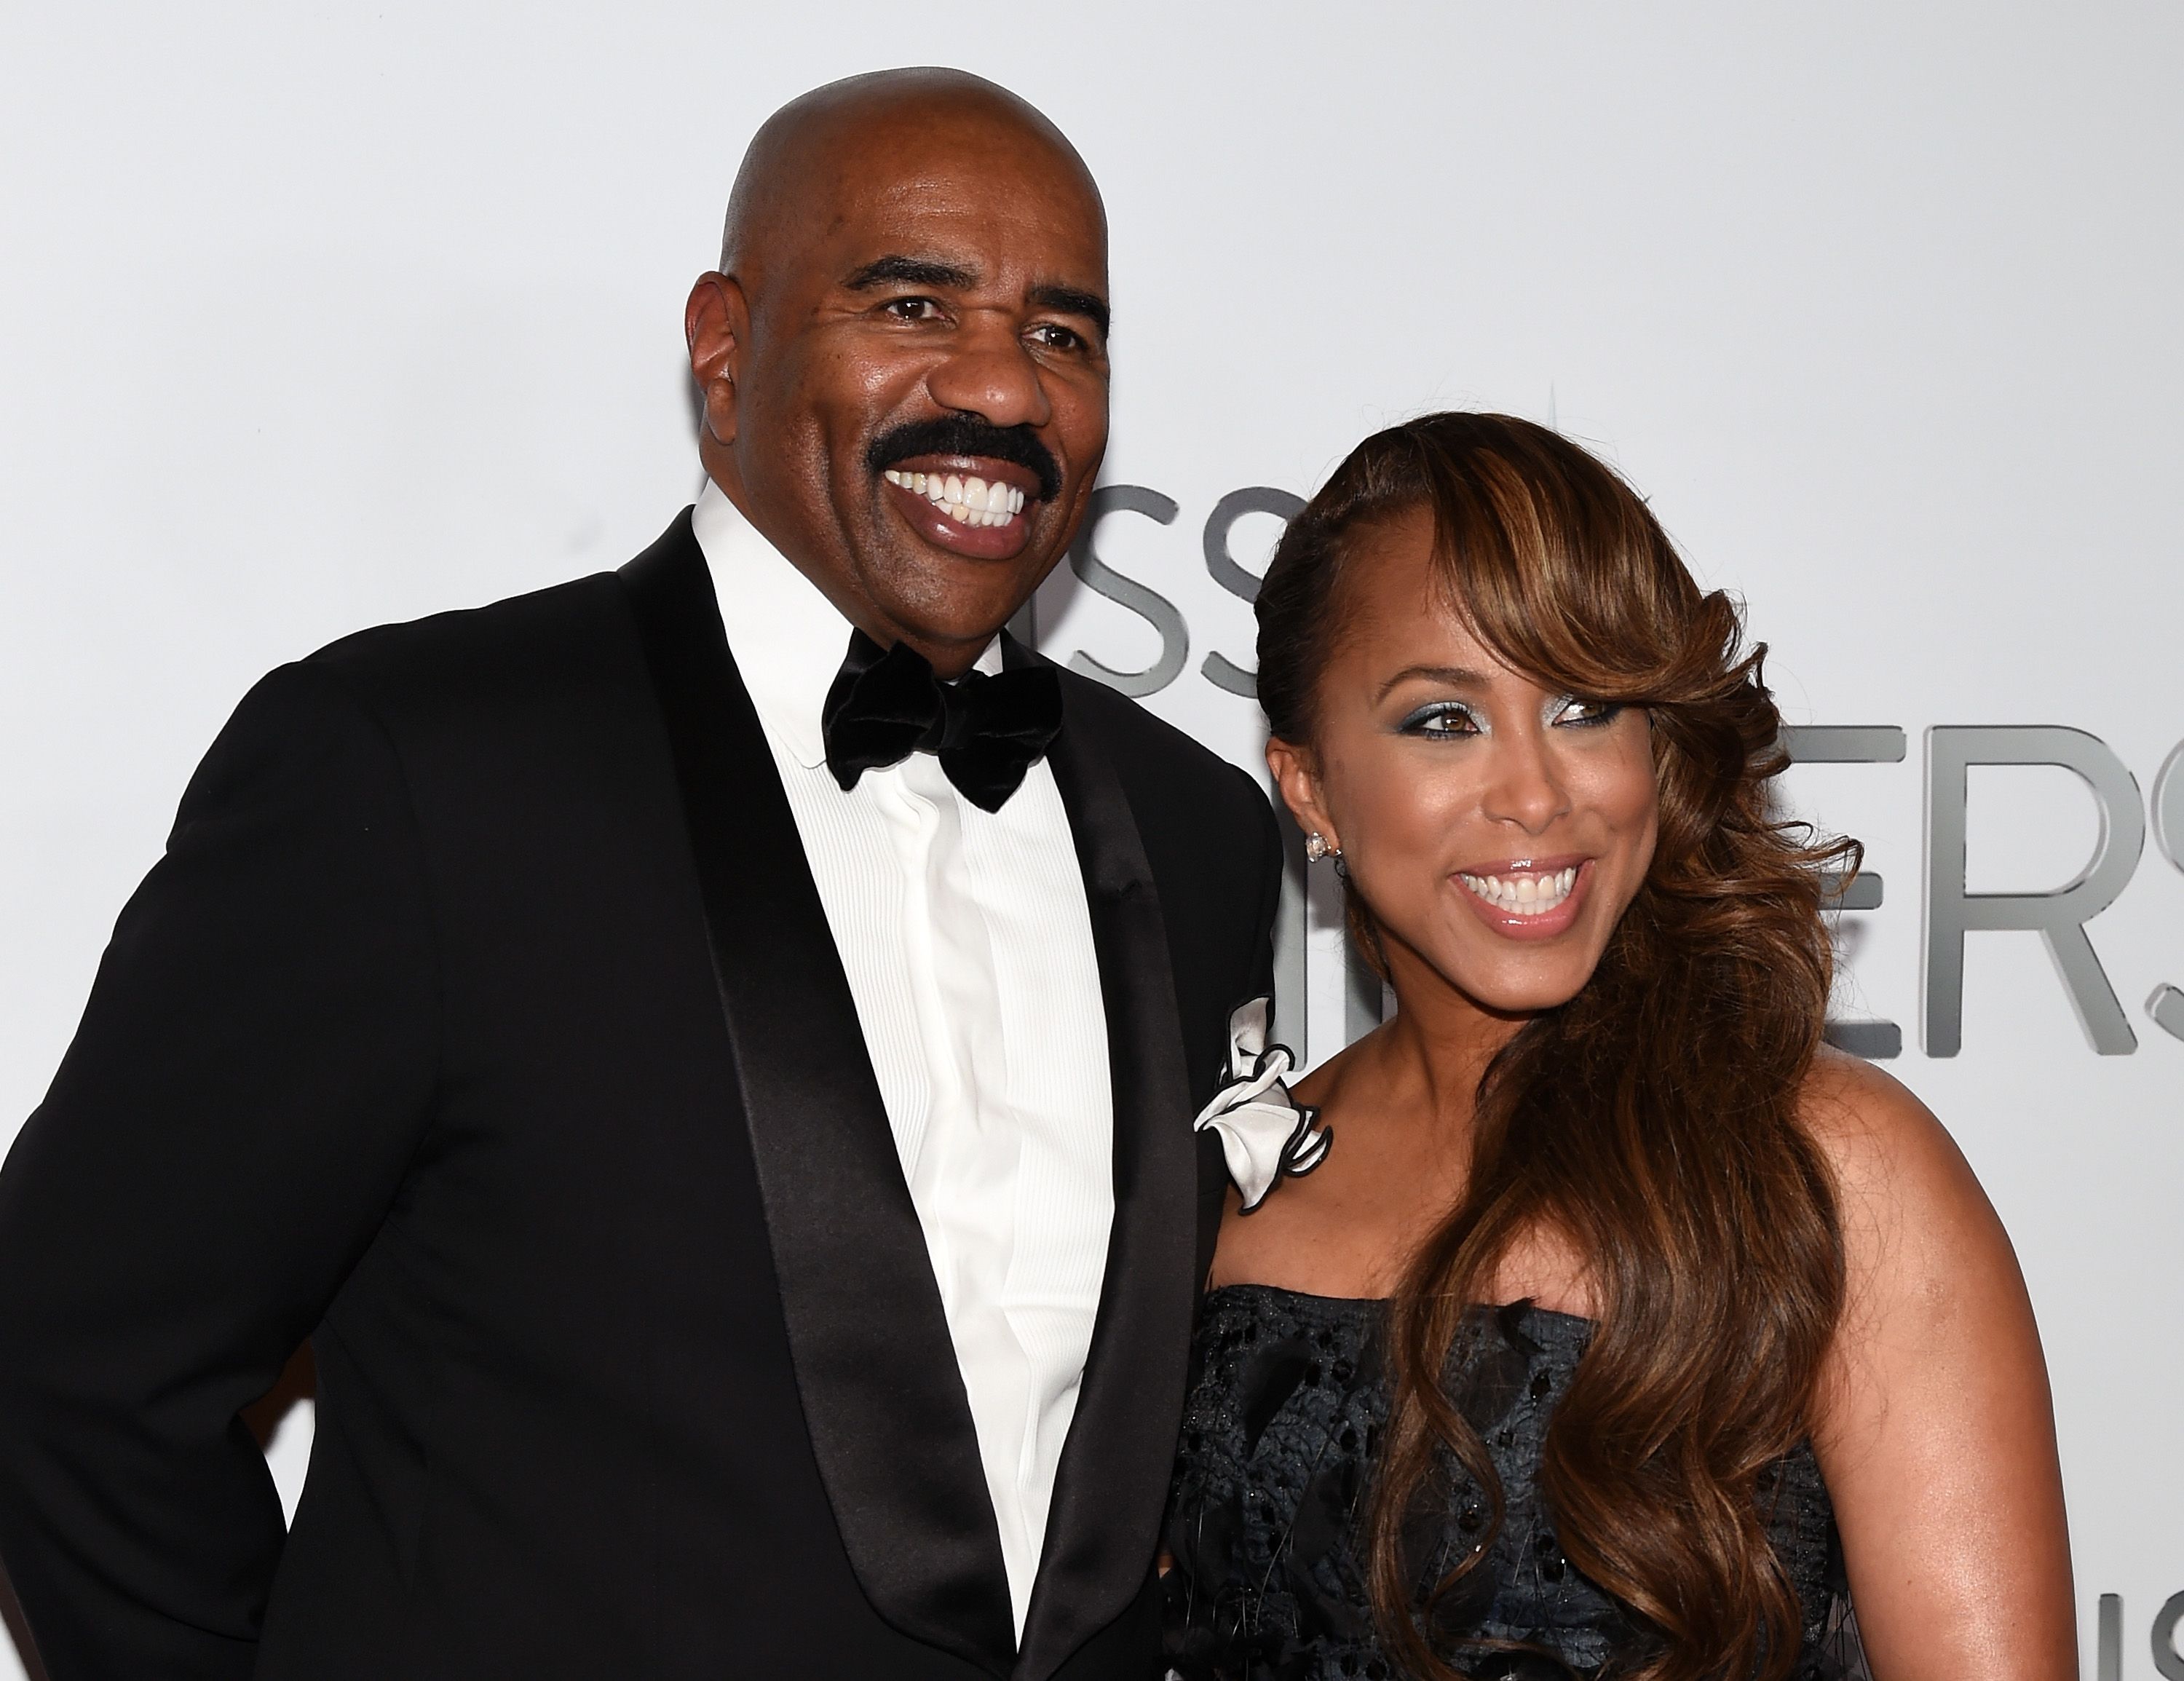 Steve Harvey and Marjorie Harvey at the 2015 Miss Universe Pageant at Planet Hollywood Resort & Casino on December 20, 2015 | Photo: Getty Images